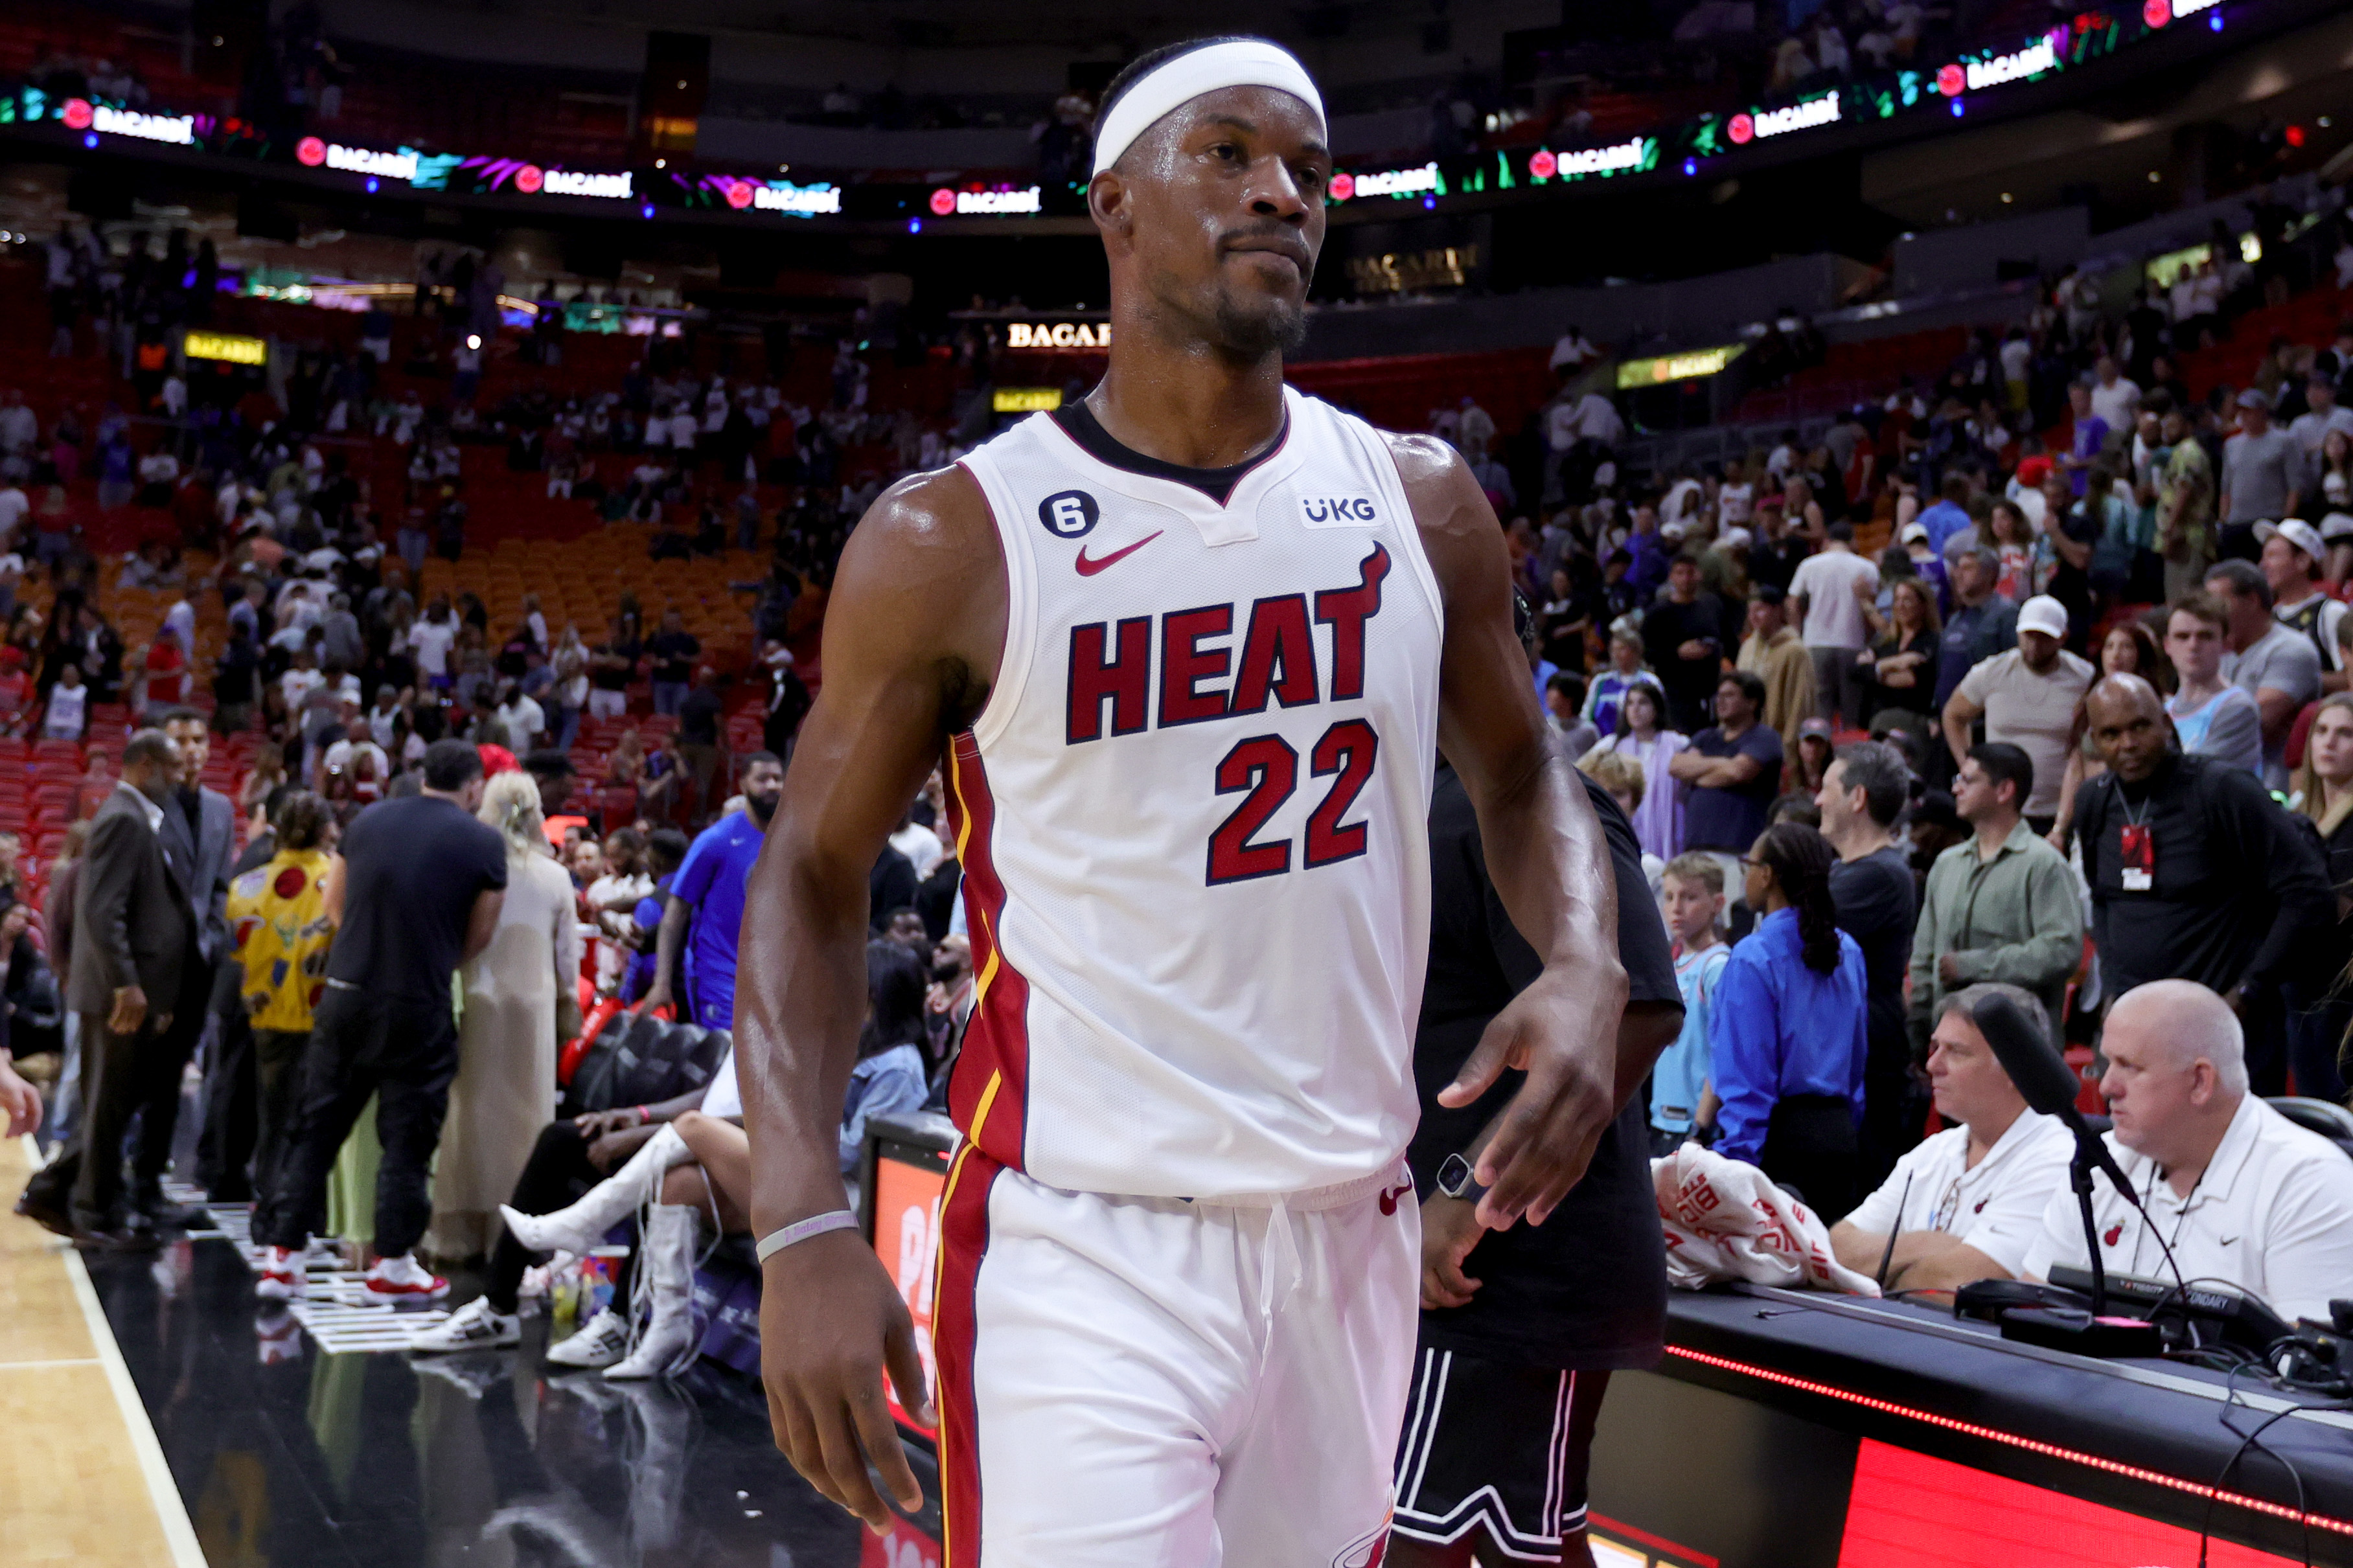 Get +400 and +300 Odds On These Heat-Bulls Boosts!